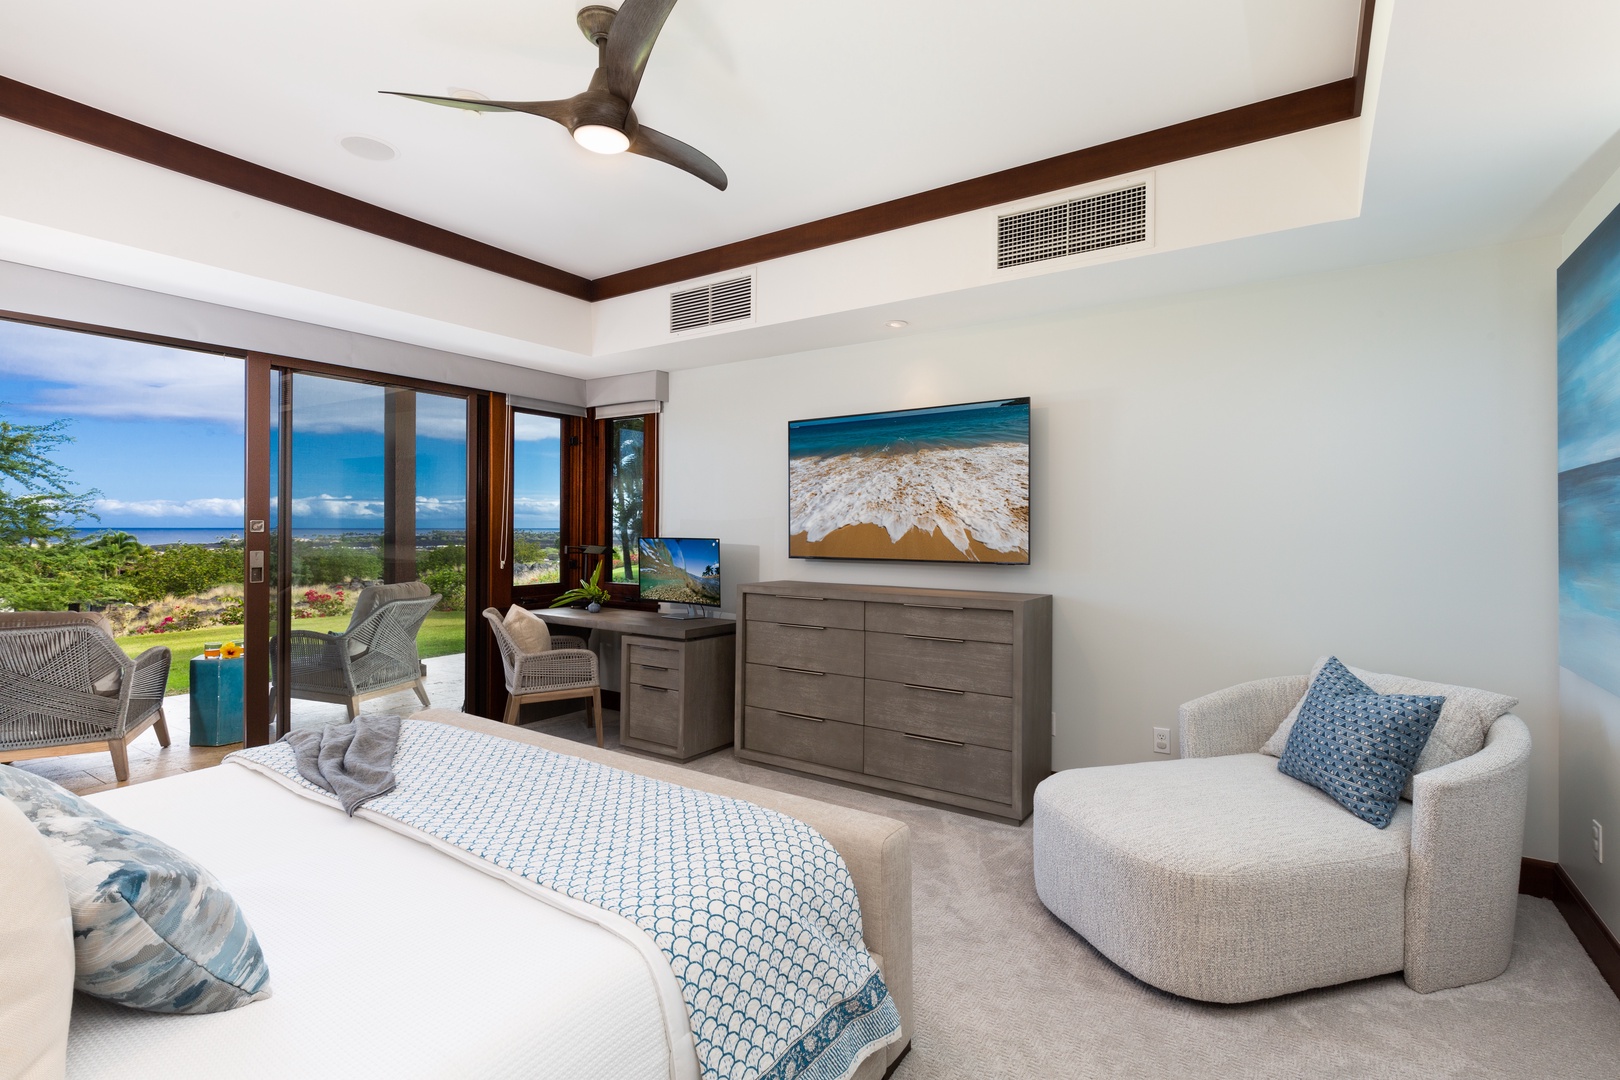 Kailua-Kona Vacation Rentals, 3BD Hali'ipua Villa (120) at Four Seasons Resort at Hualalai - Primary suite bedroom with views of the private ocean view lanai, work space and 55’’ flat screen TV